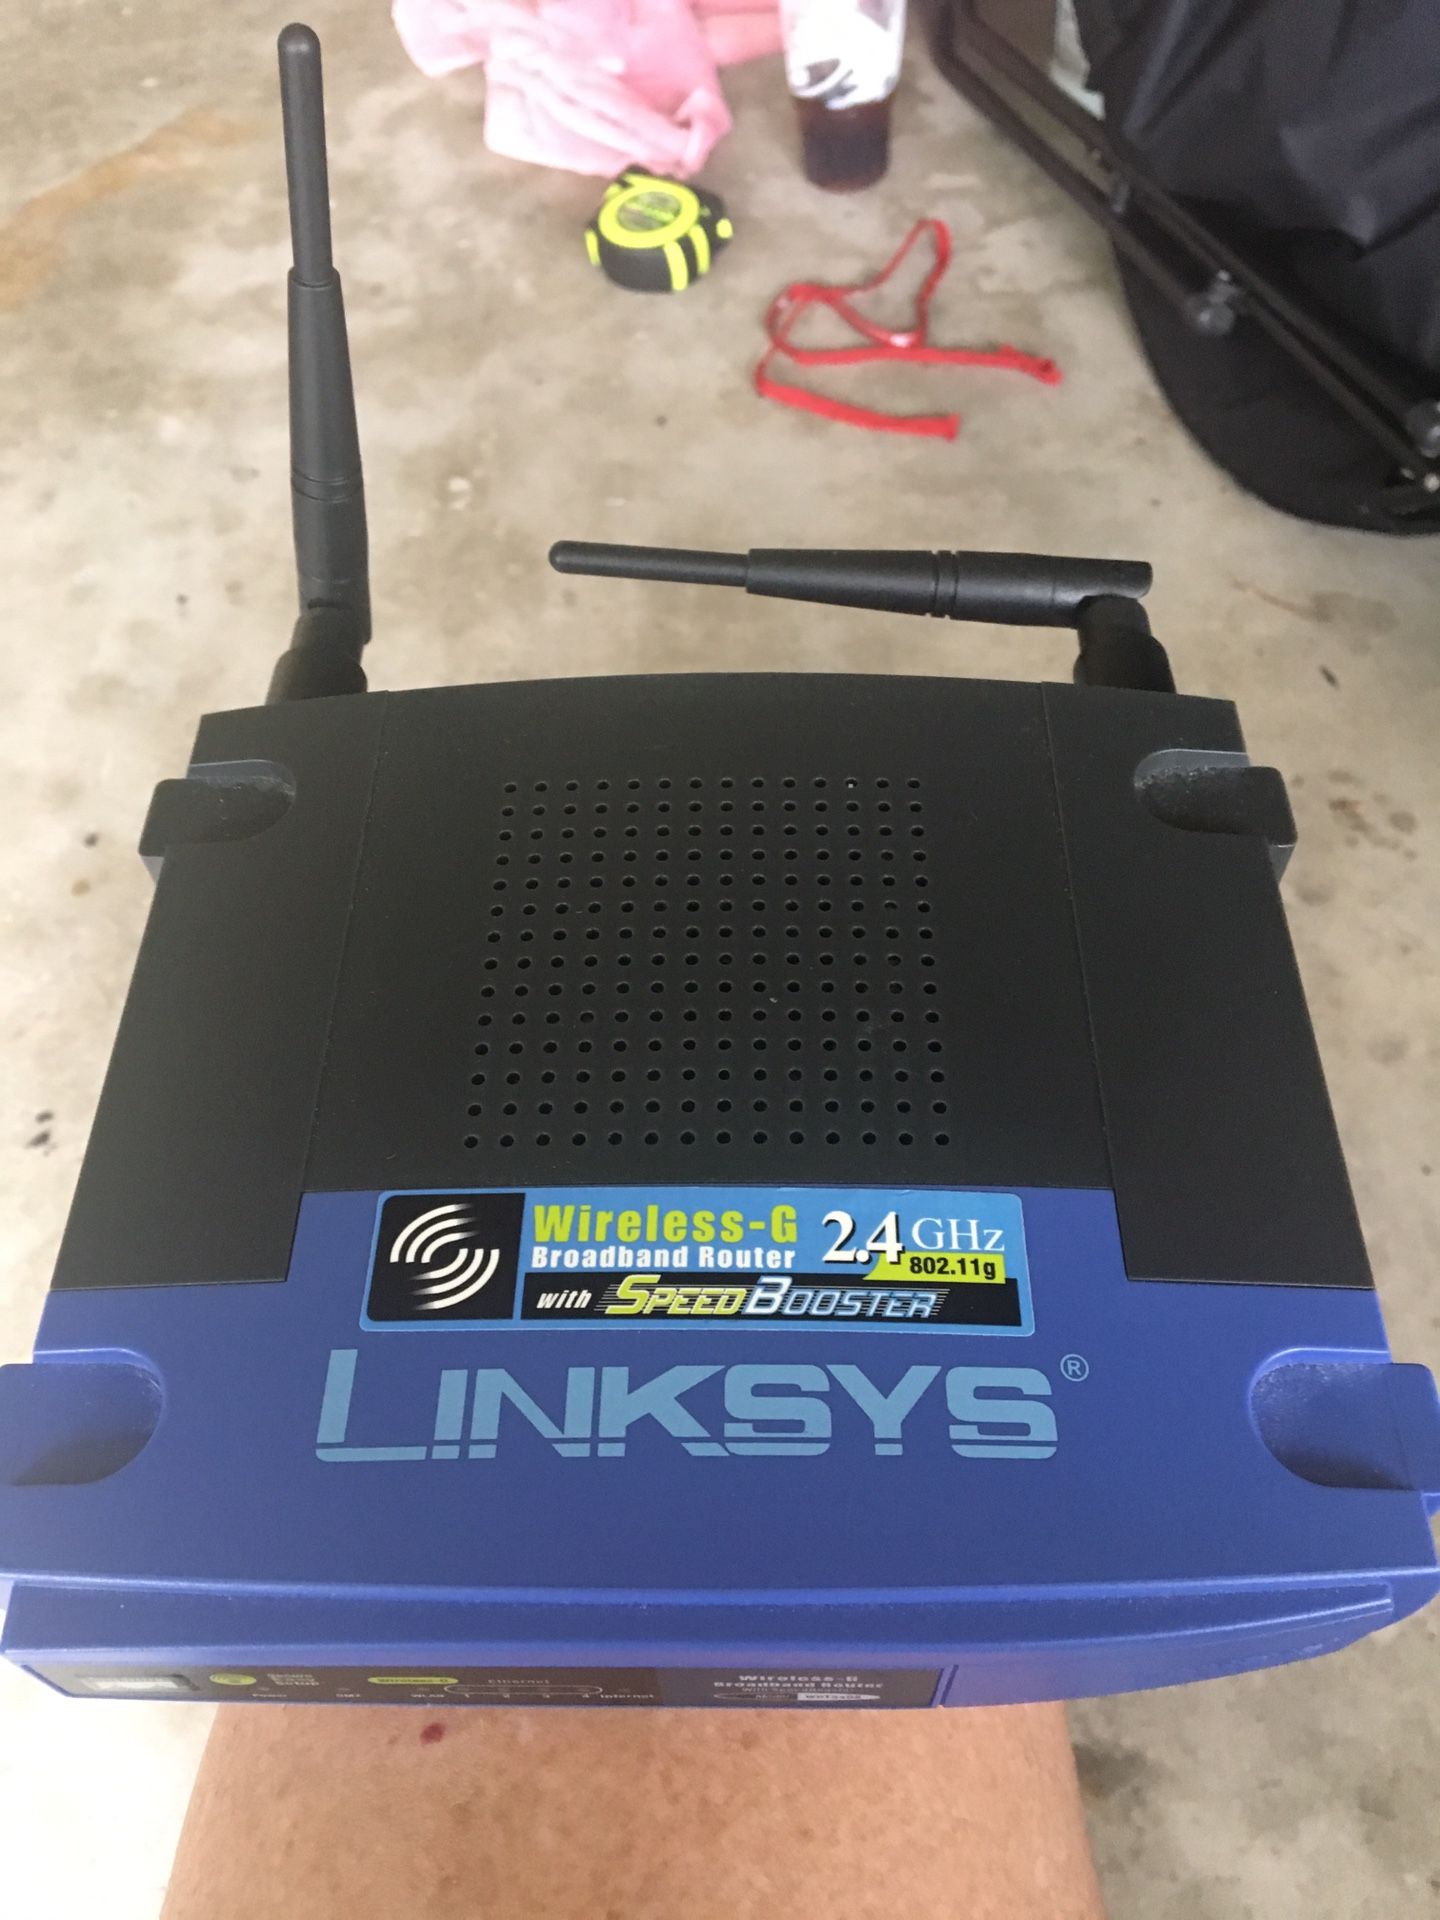 Linksys 2.4 GHz Broadband Wireless Router with Speed Booster.